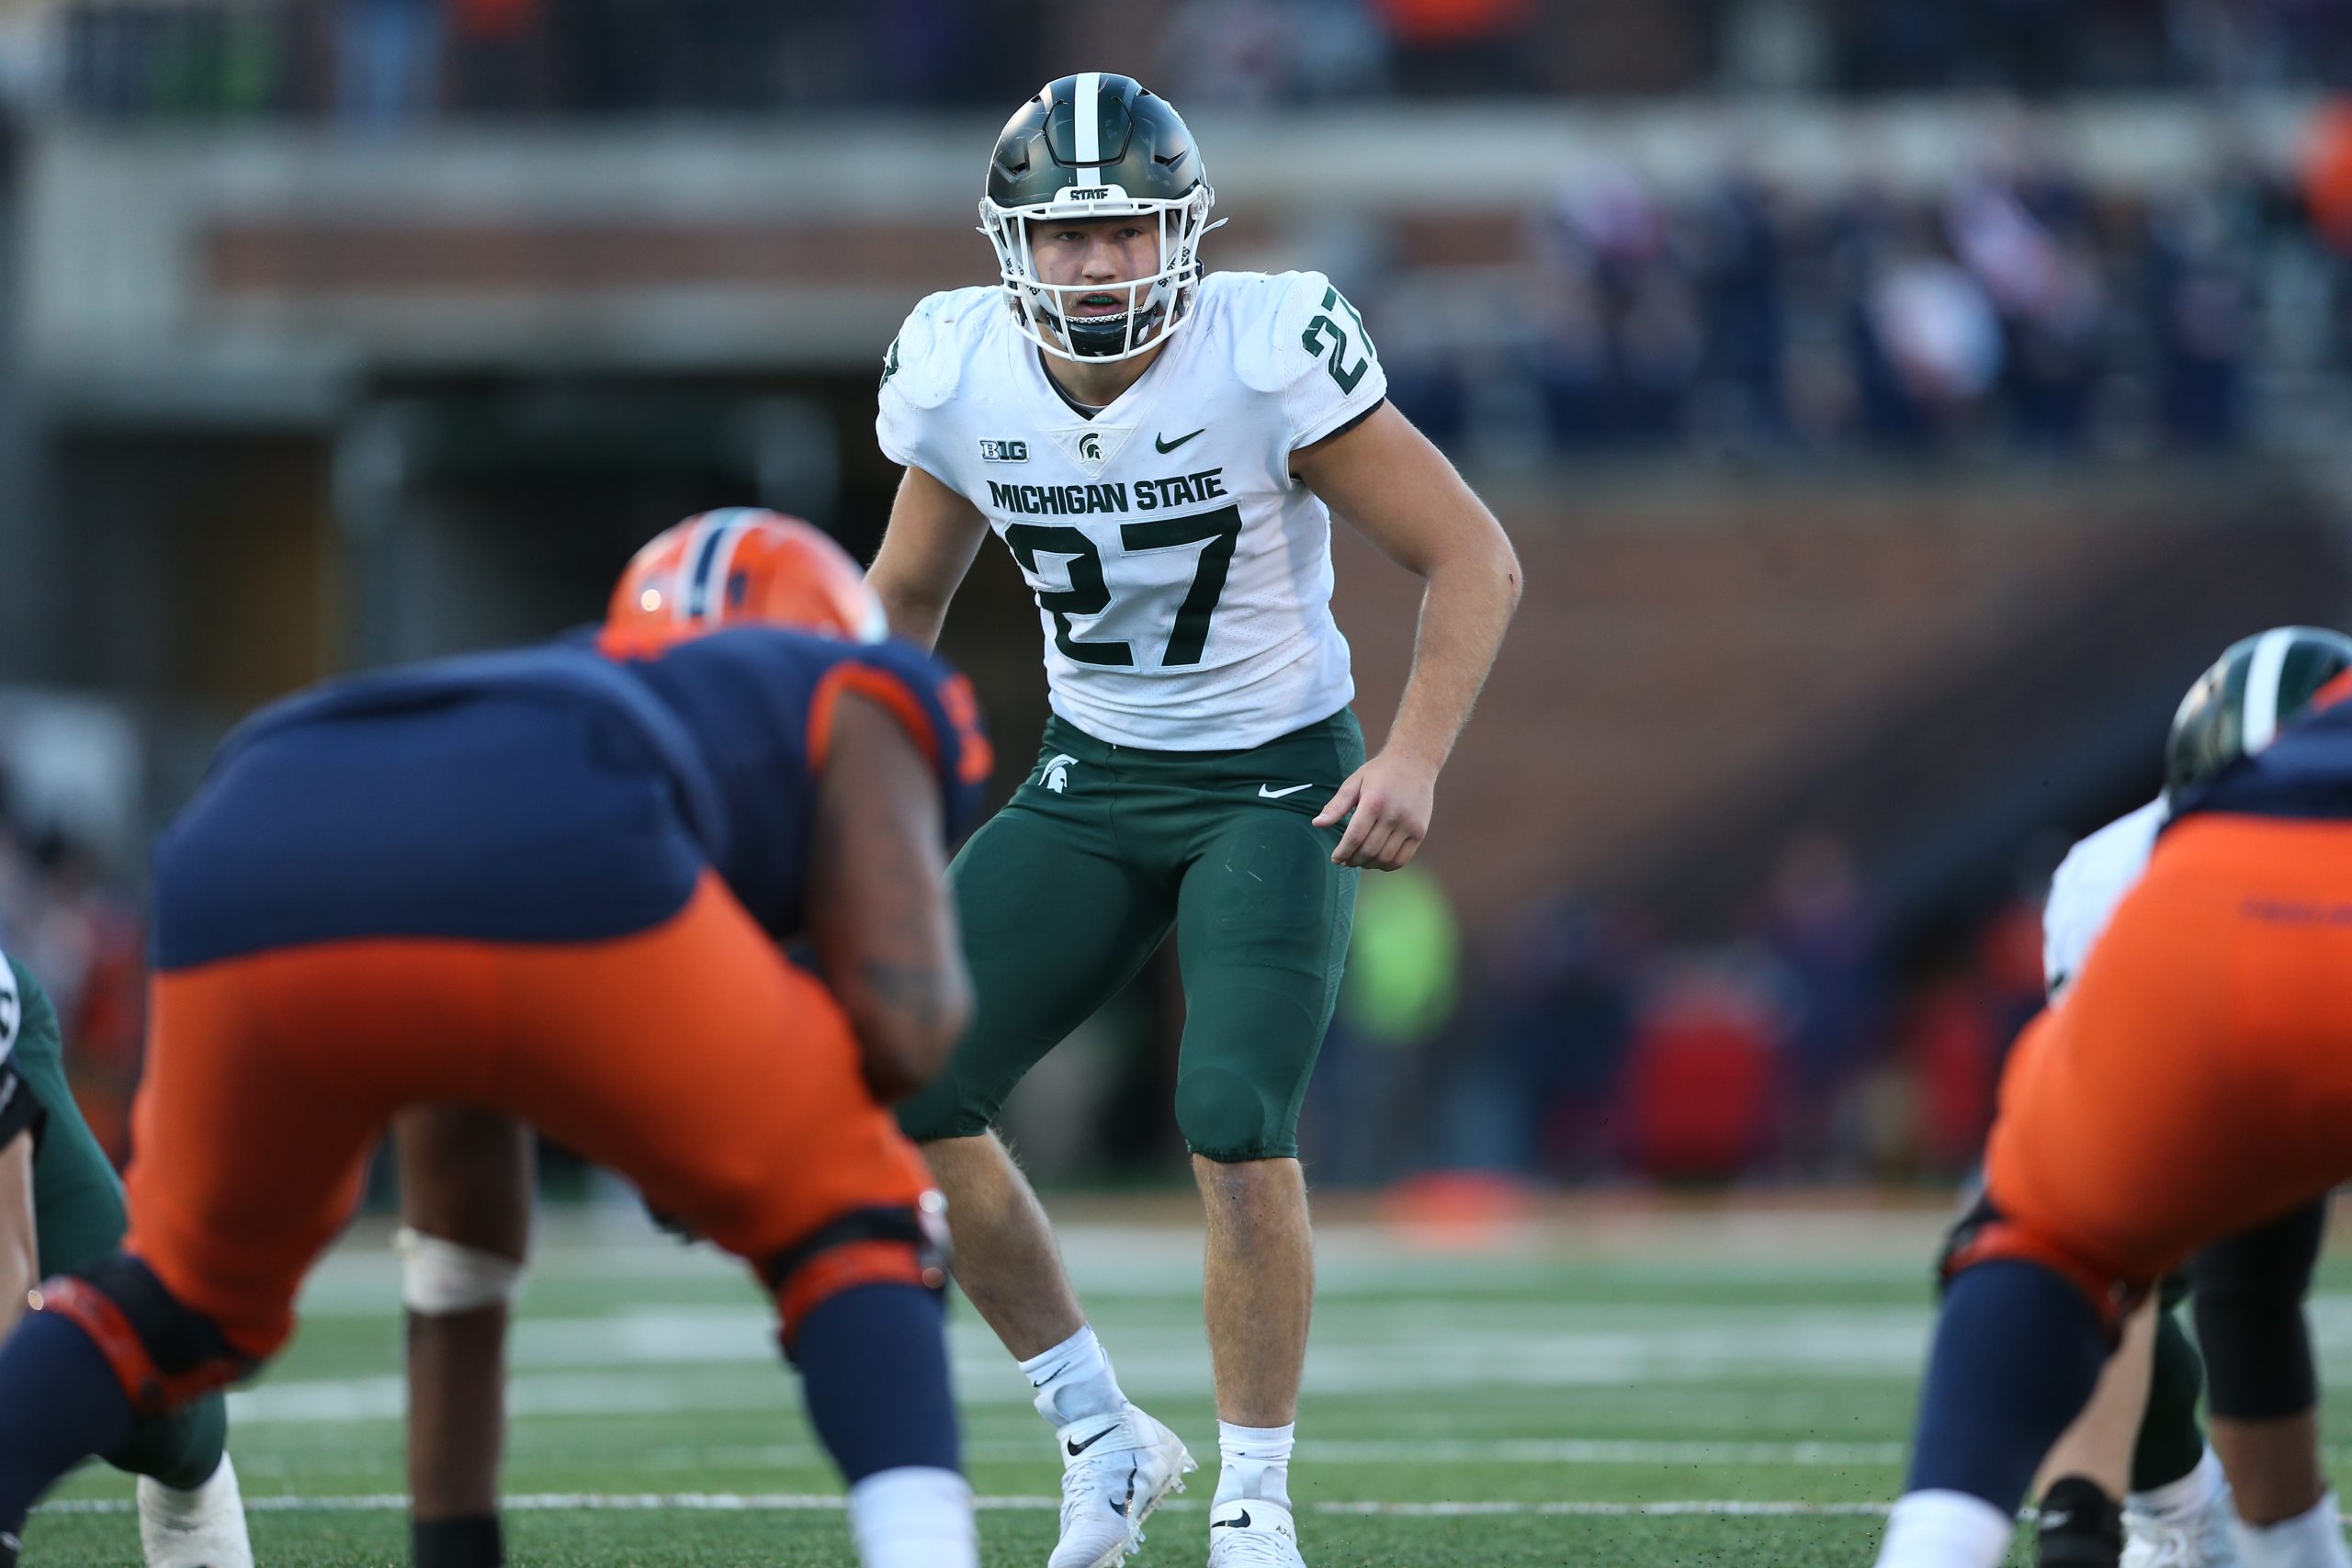 MICHIGAN STATE FOOTBALL: Tucker, Spartans Looking for Quick Start to 2023 Season